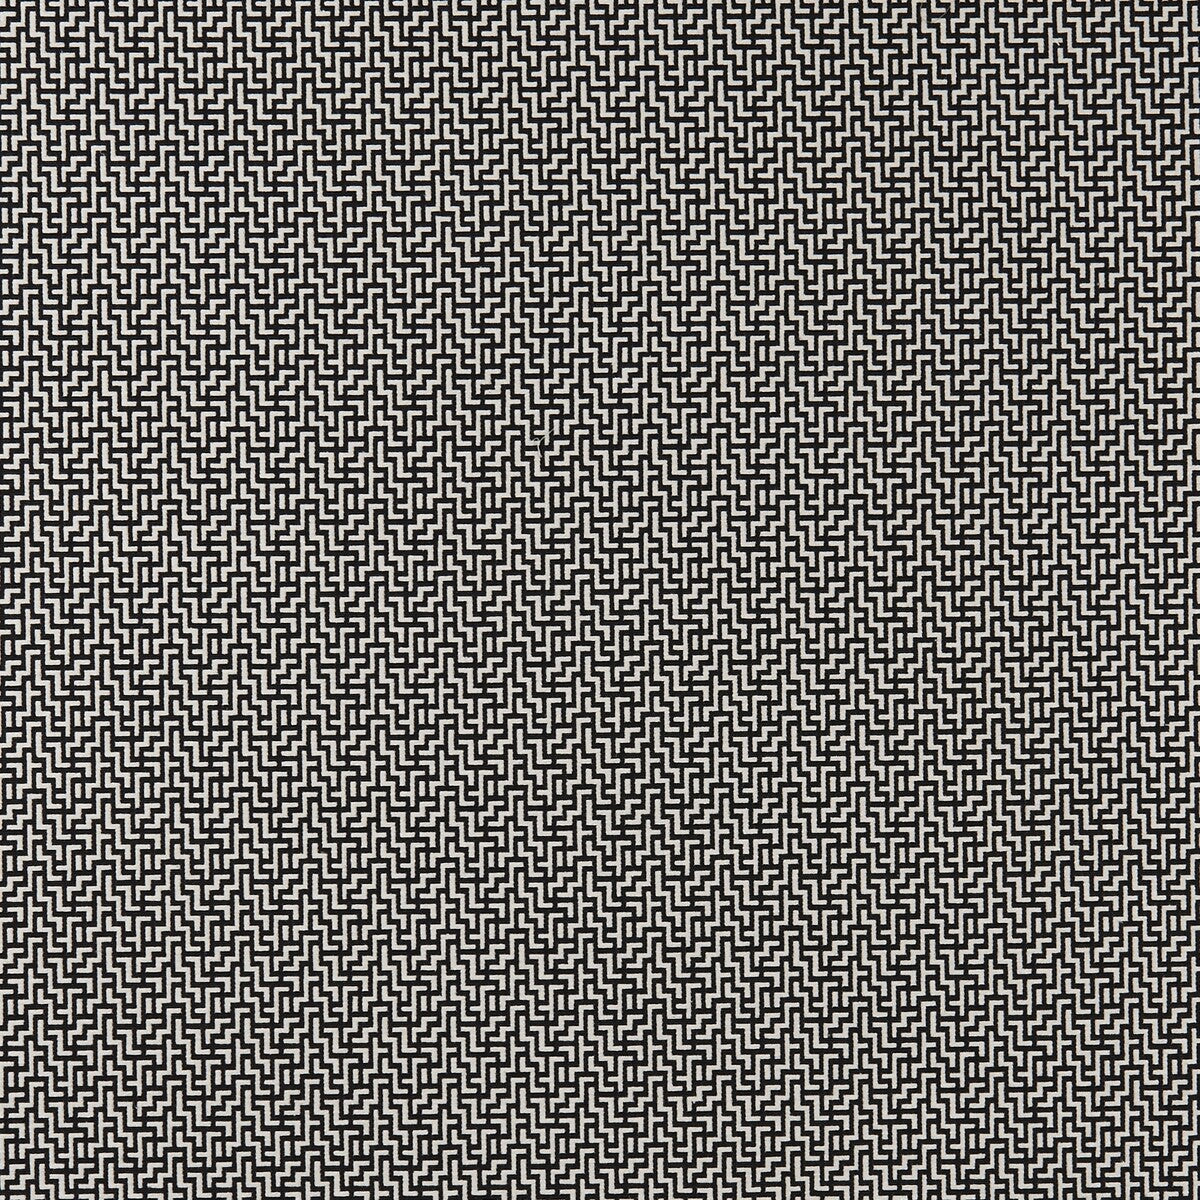 Bw1030 fabric in black/white color - pattern F0903/01.CAC.0 - by Clarke And Clarke in the Clarke &amp; Clarke Black + White collection